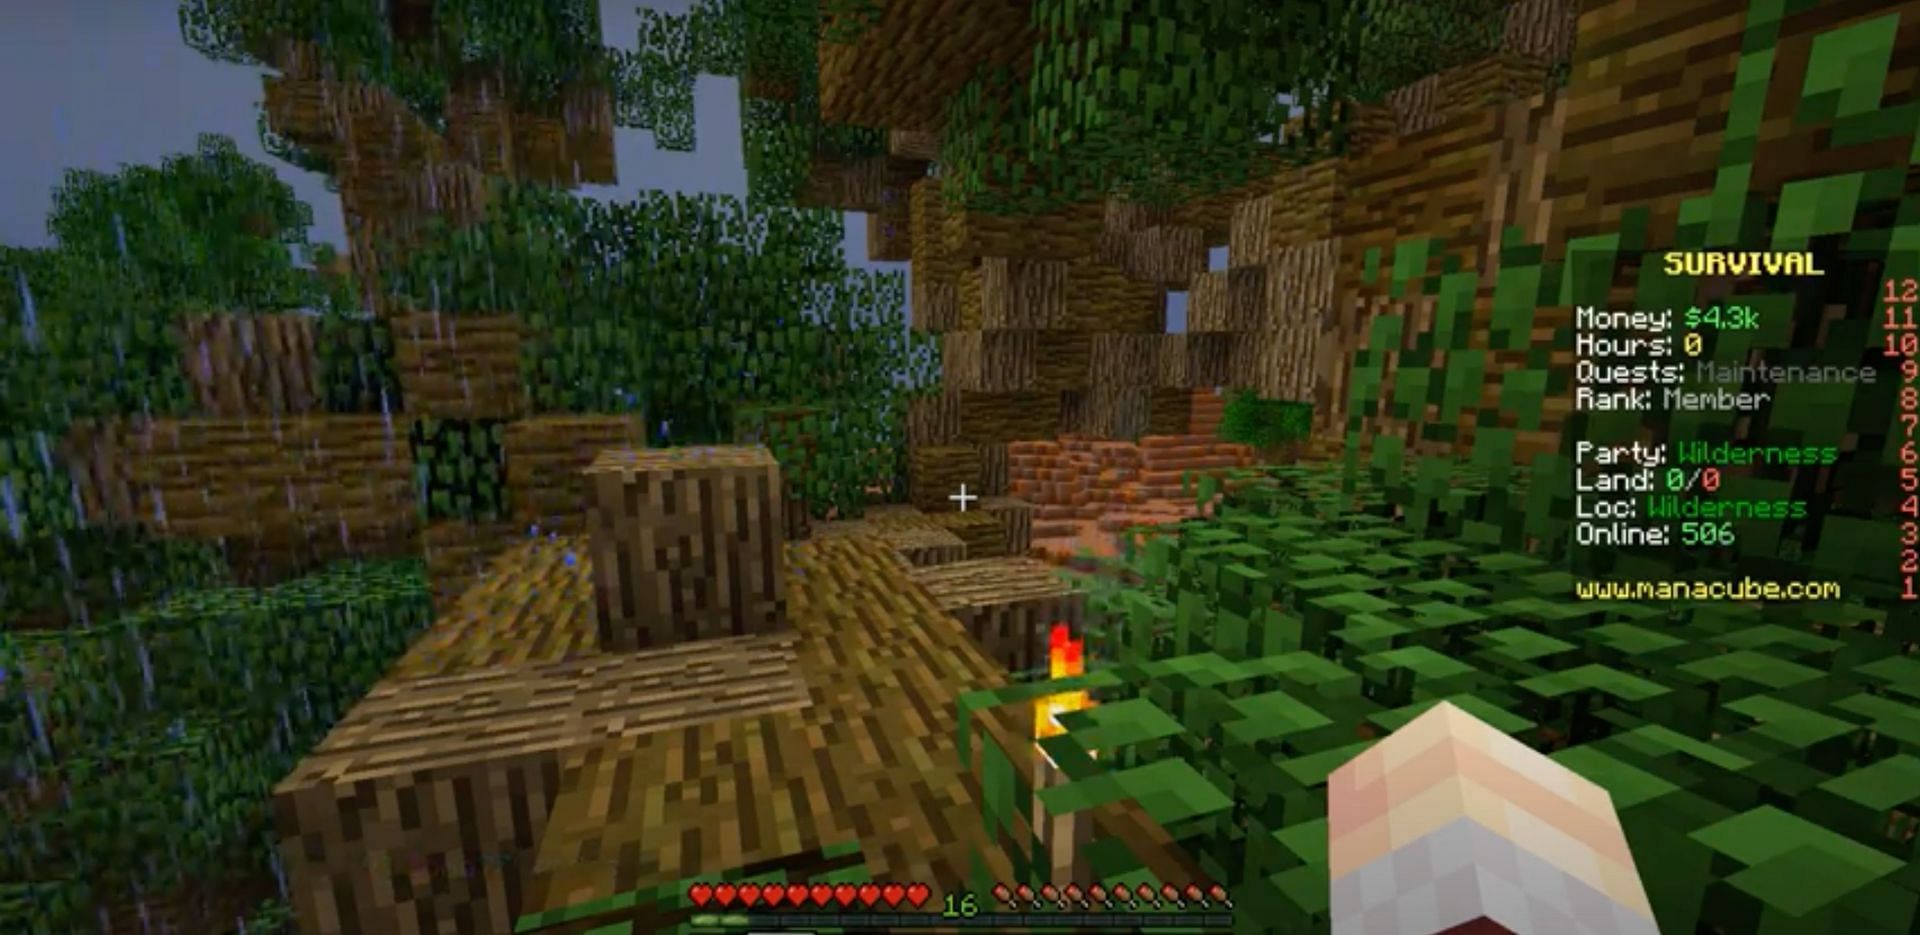 Players of Minecraft can join many different servers to participate in varying Hunger Games modes (Image via SPONTANEOUS Gaming/YouTube)